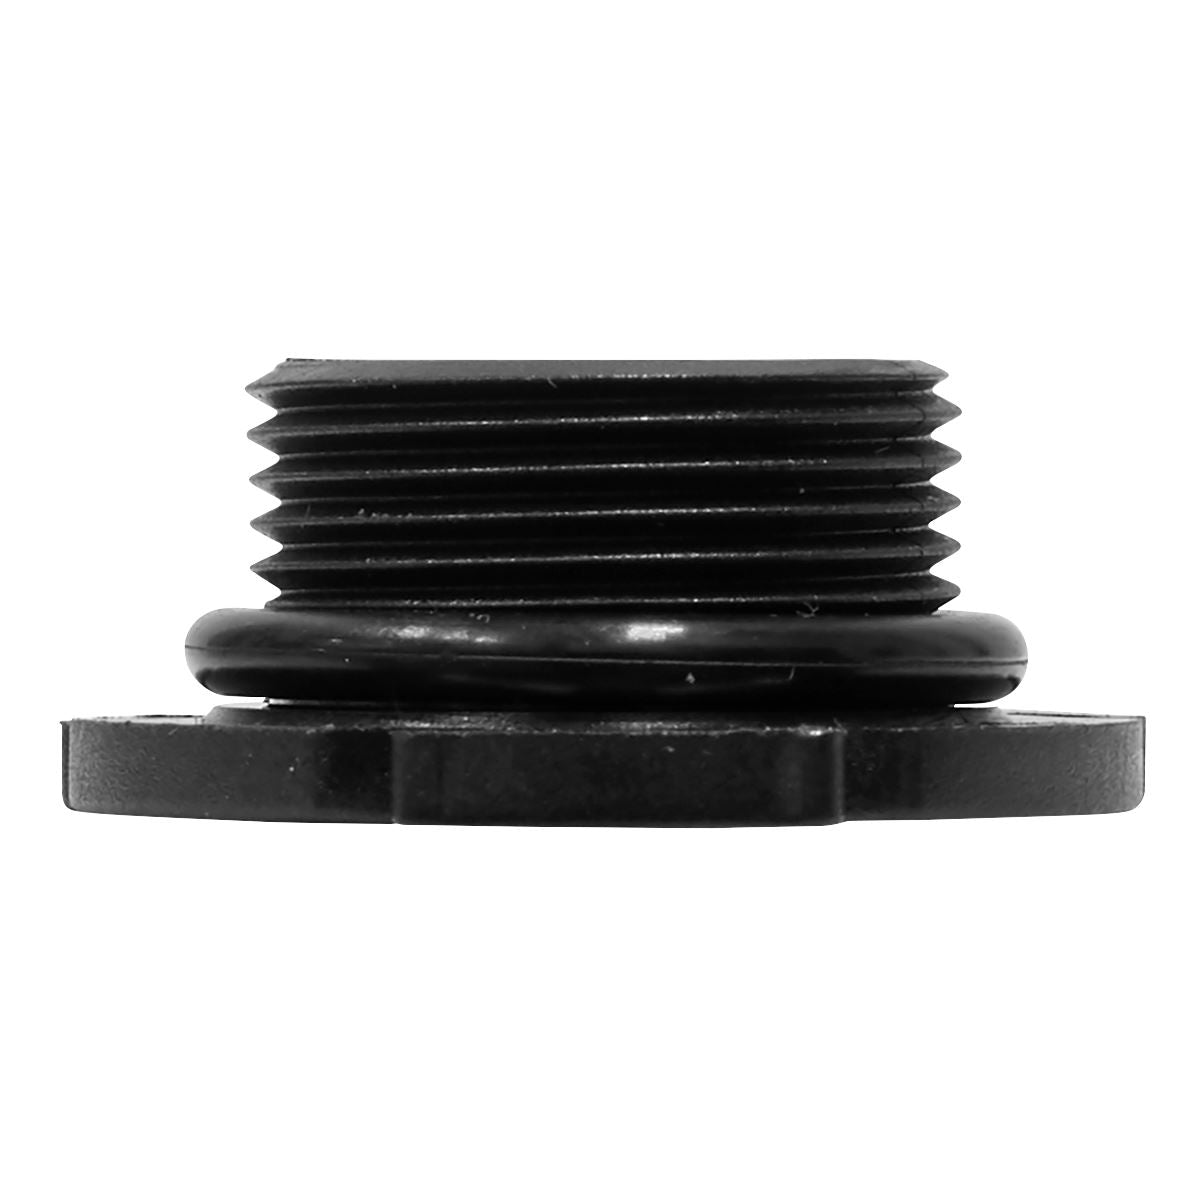 Sealey Plastic Sump Plug For BMW (BMW Part Number 11137605018)